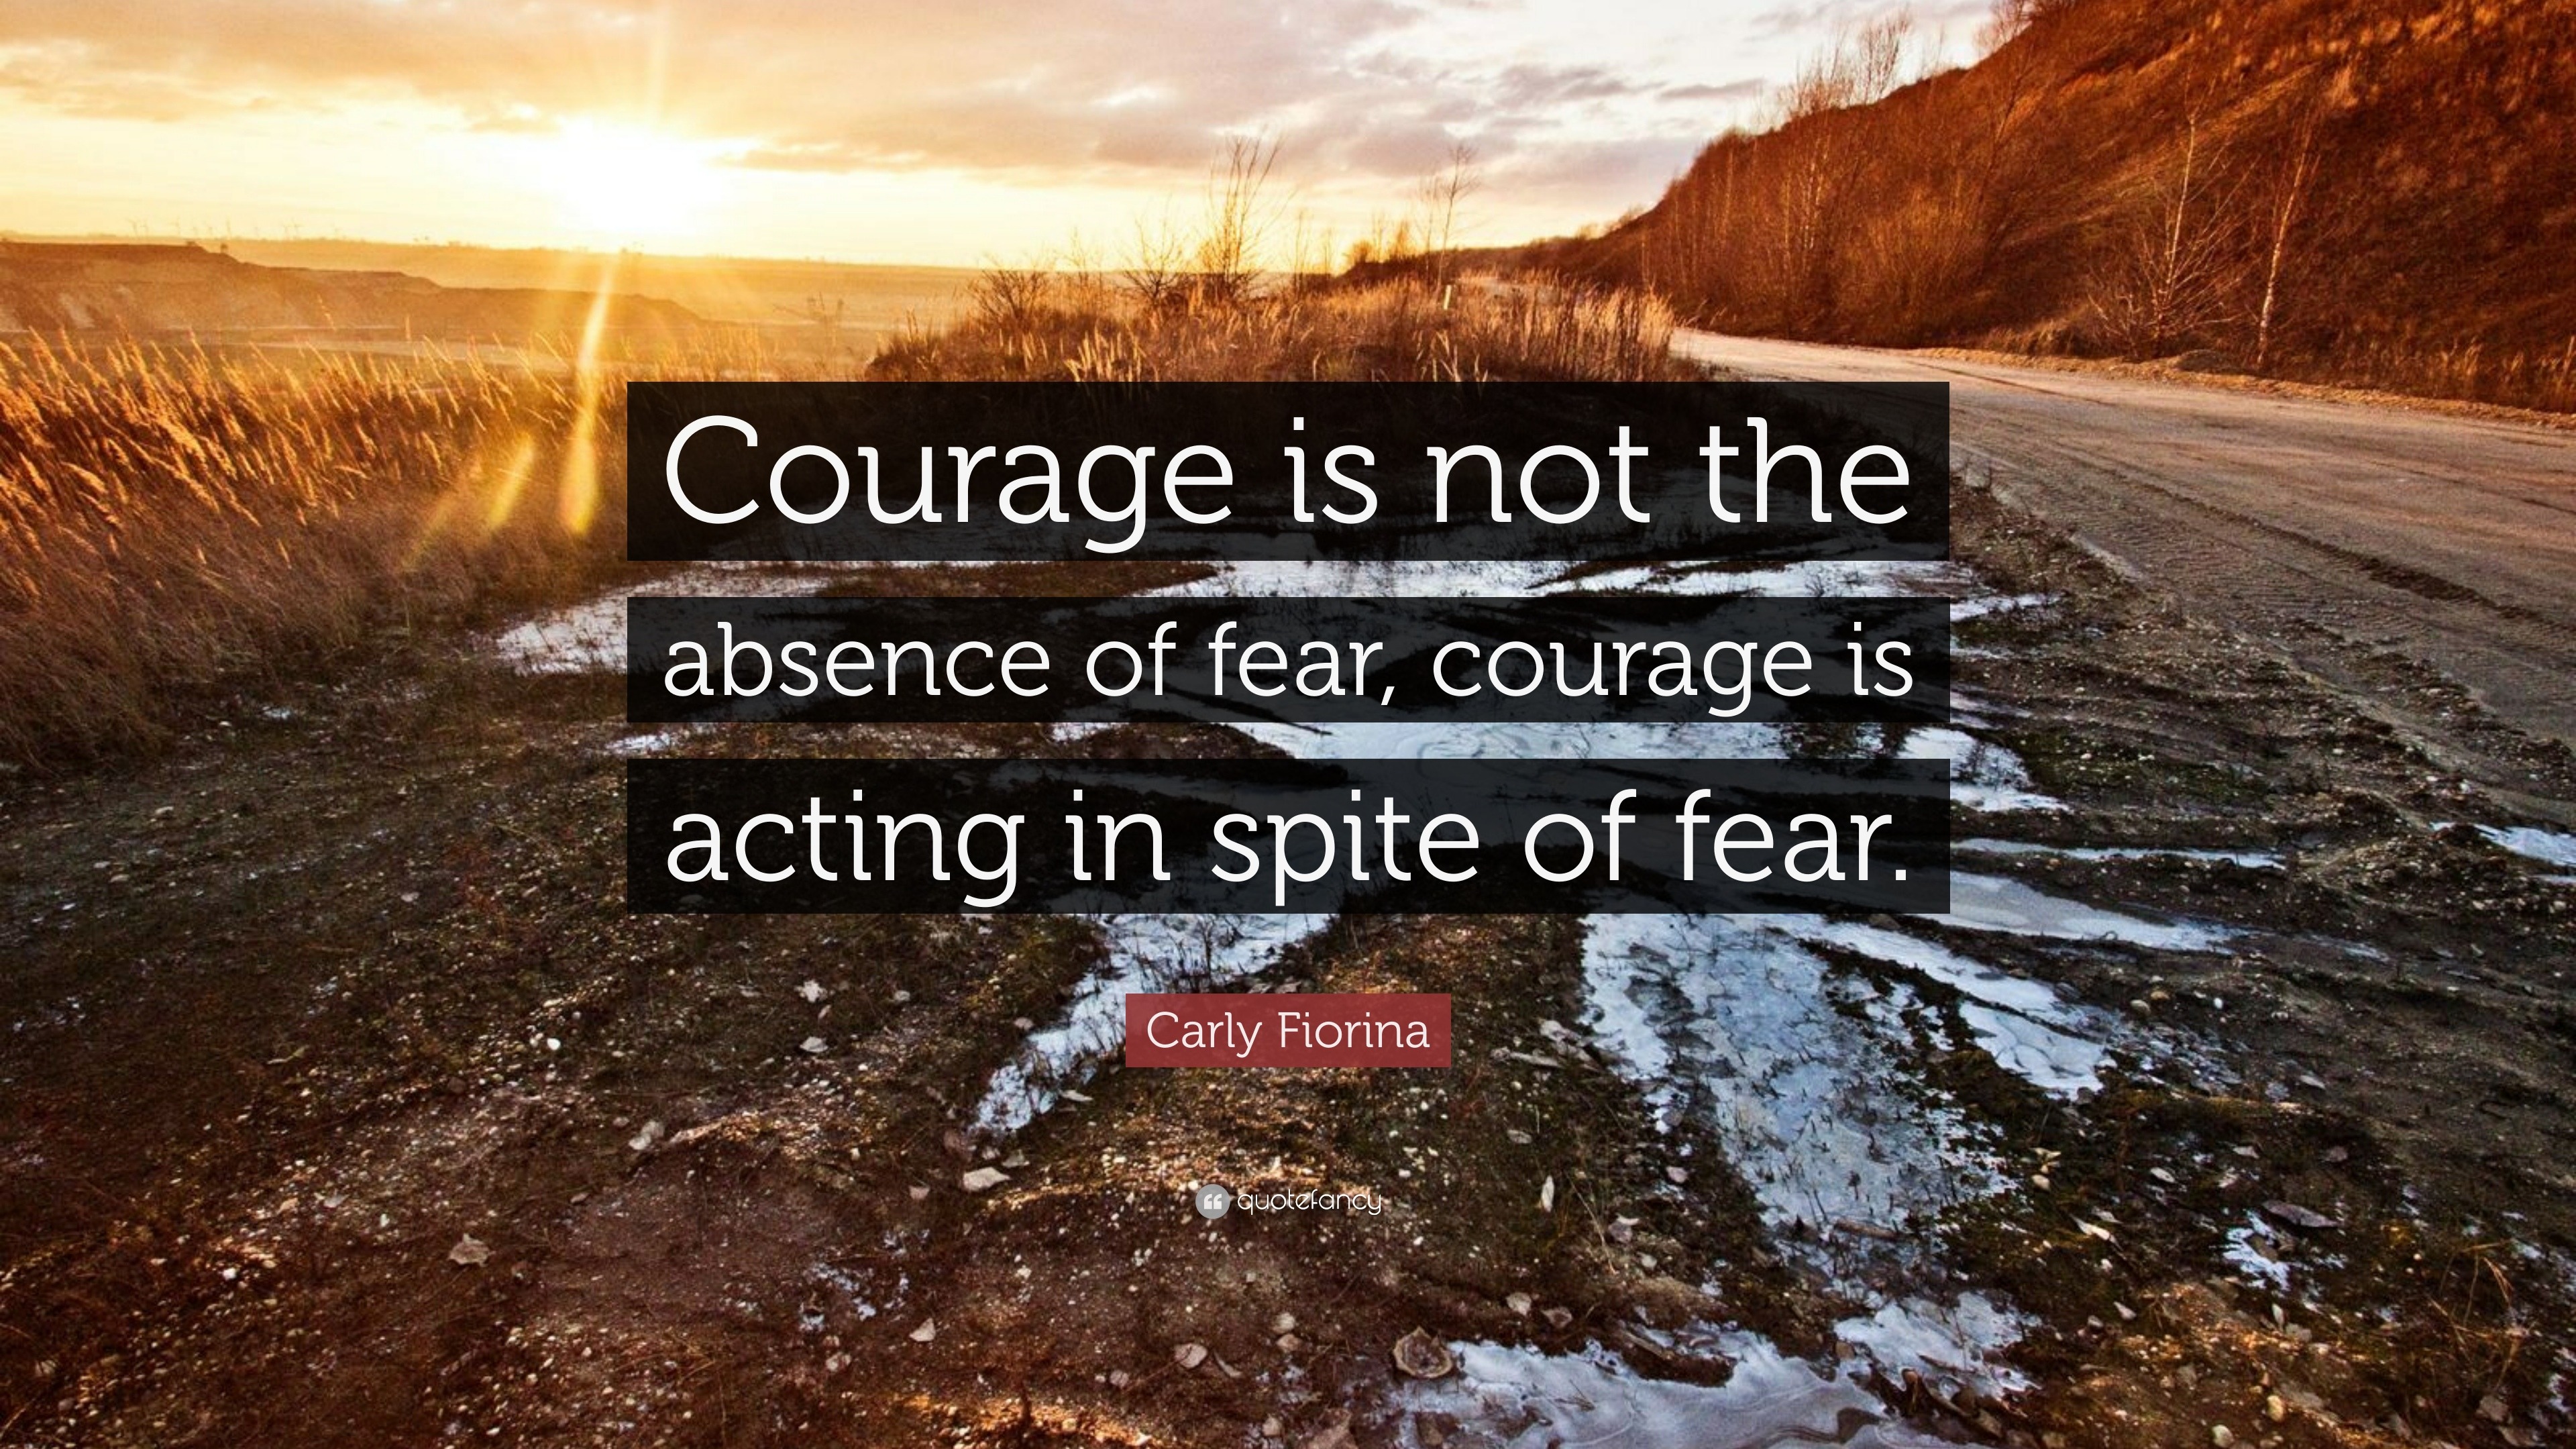 Carly Fiorina Quote: “Courage is not the absence of fear, courage is ...